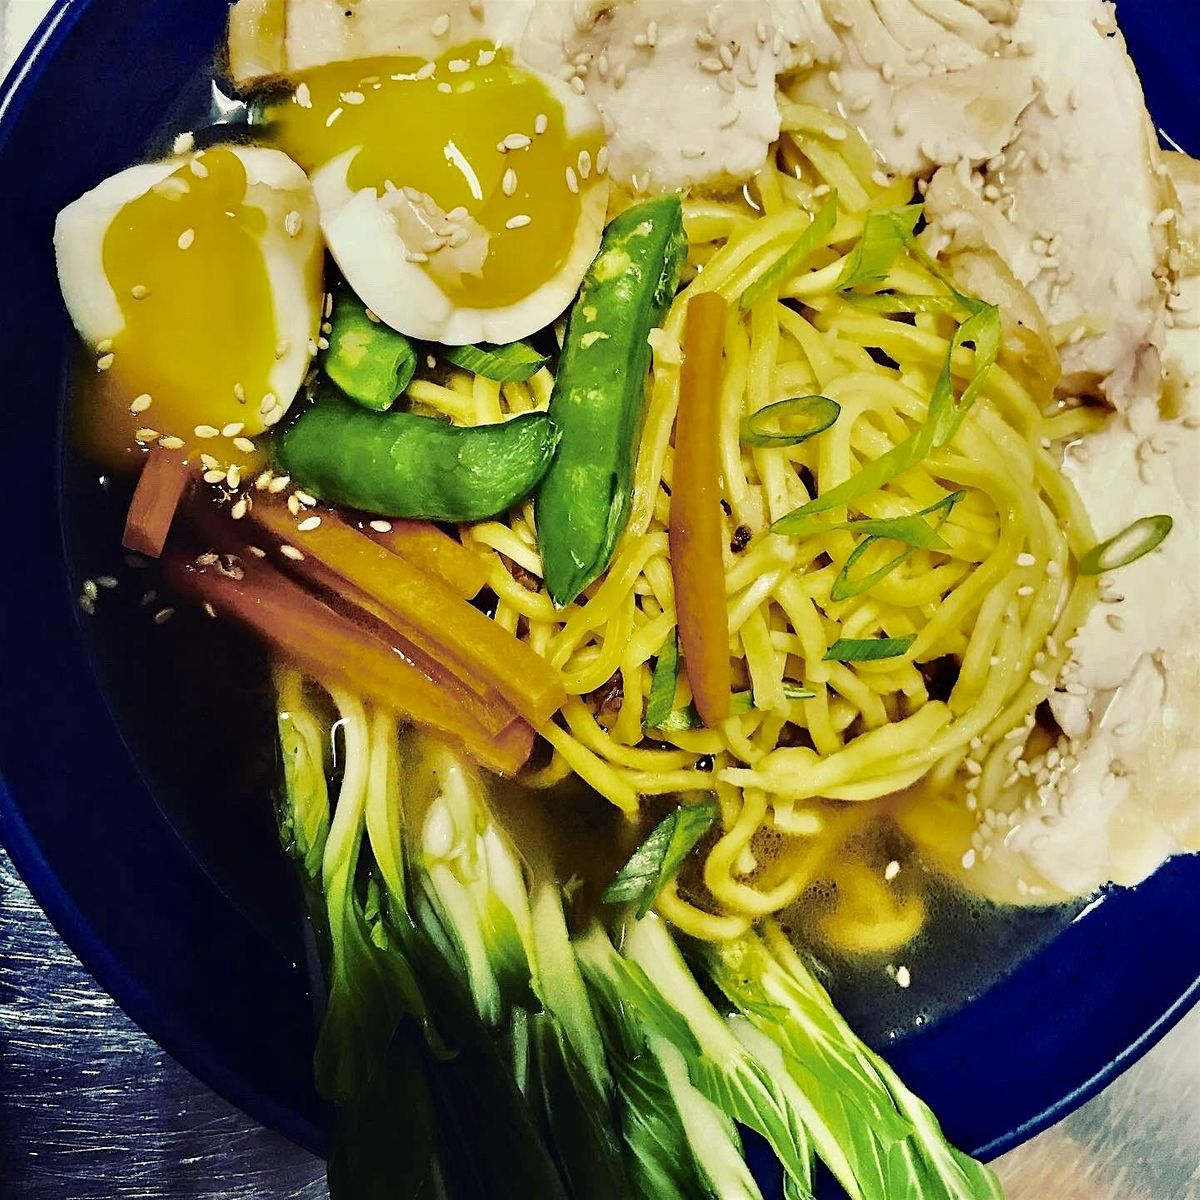 Ramen with noodles and broth from scratch